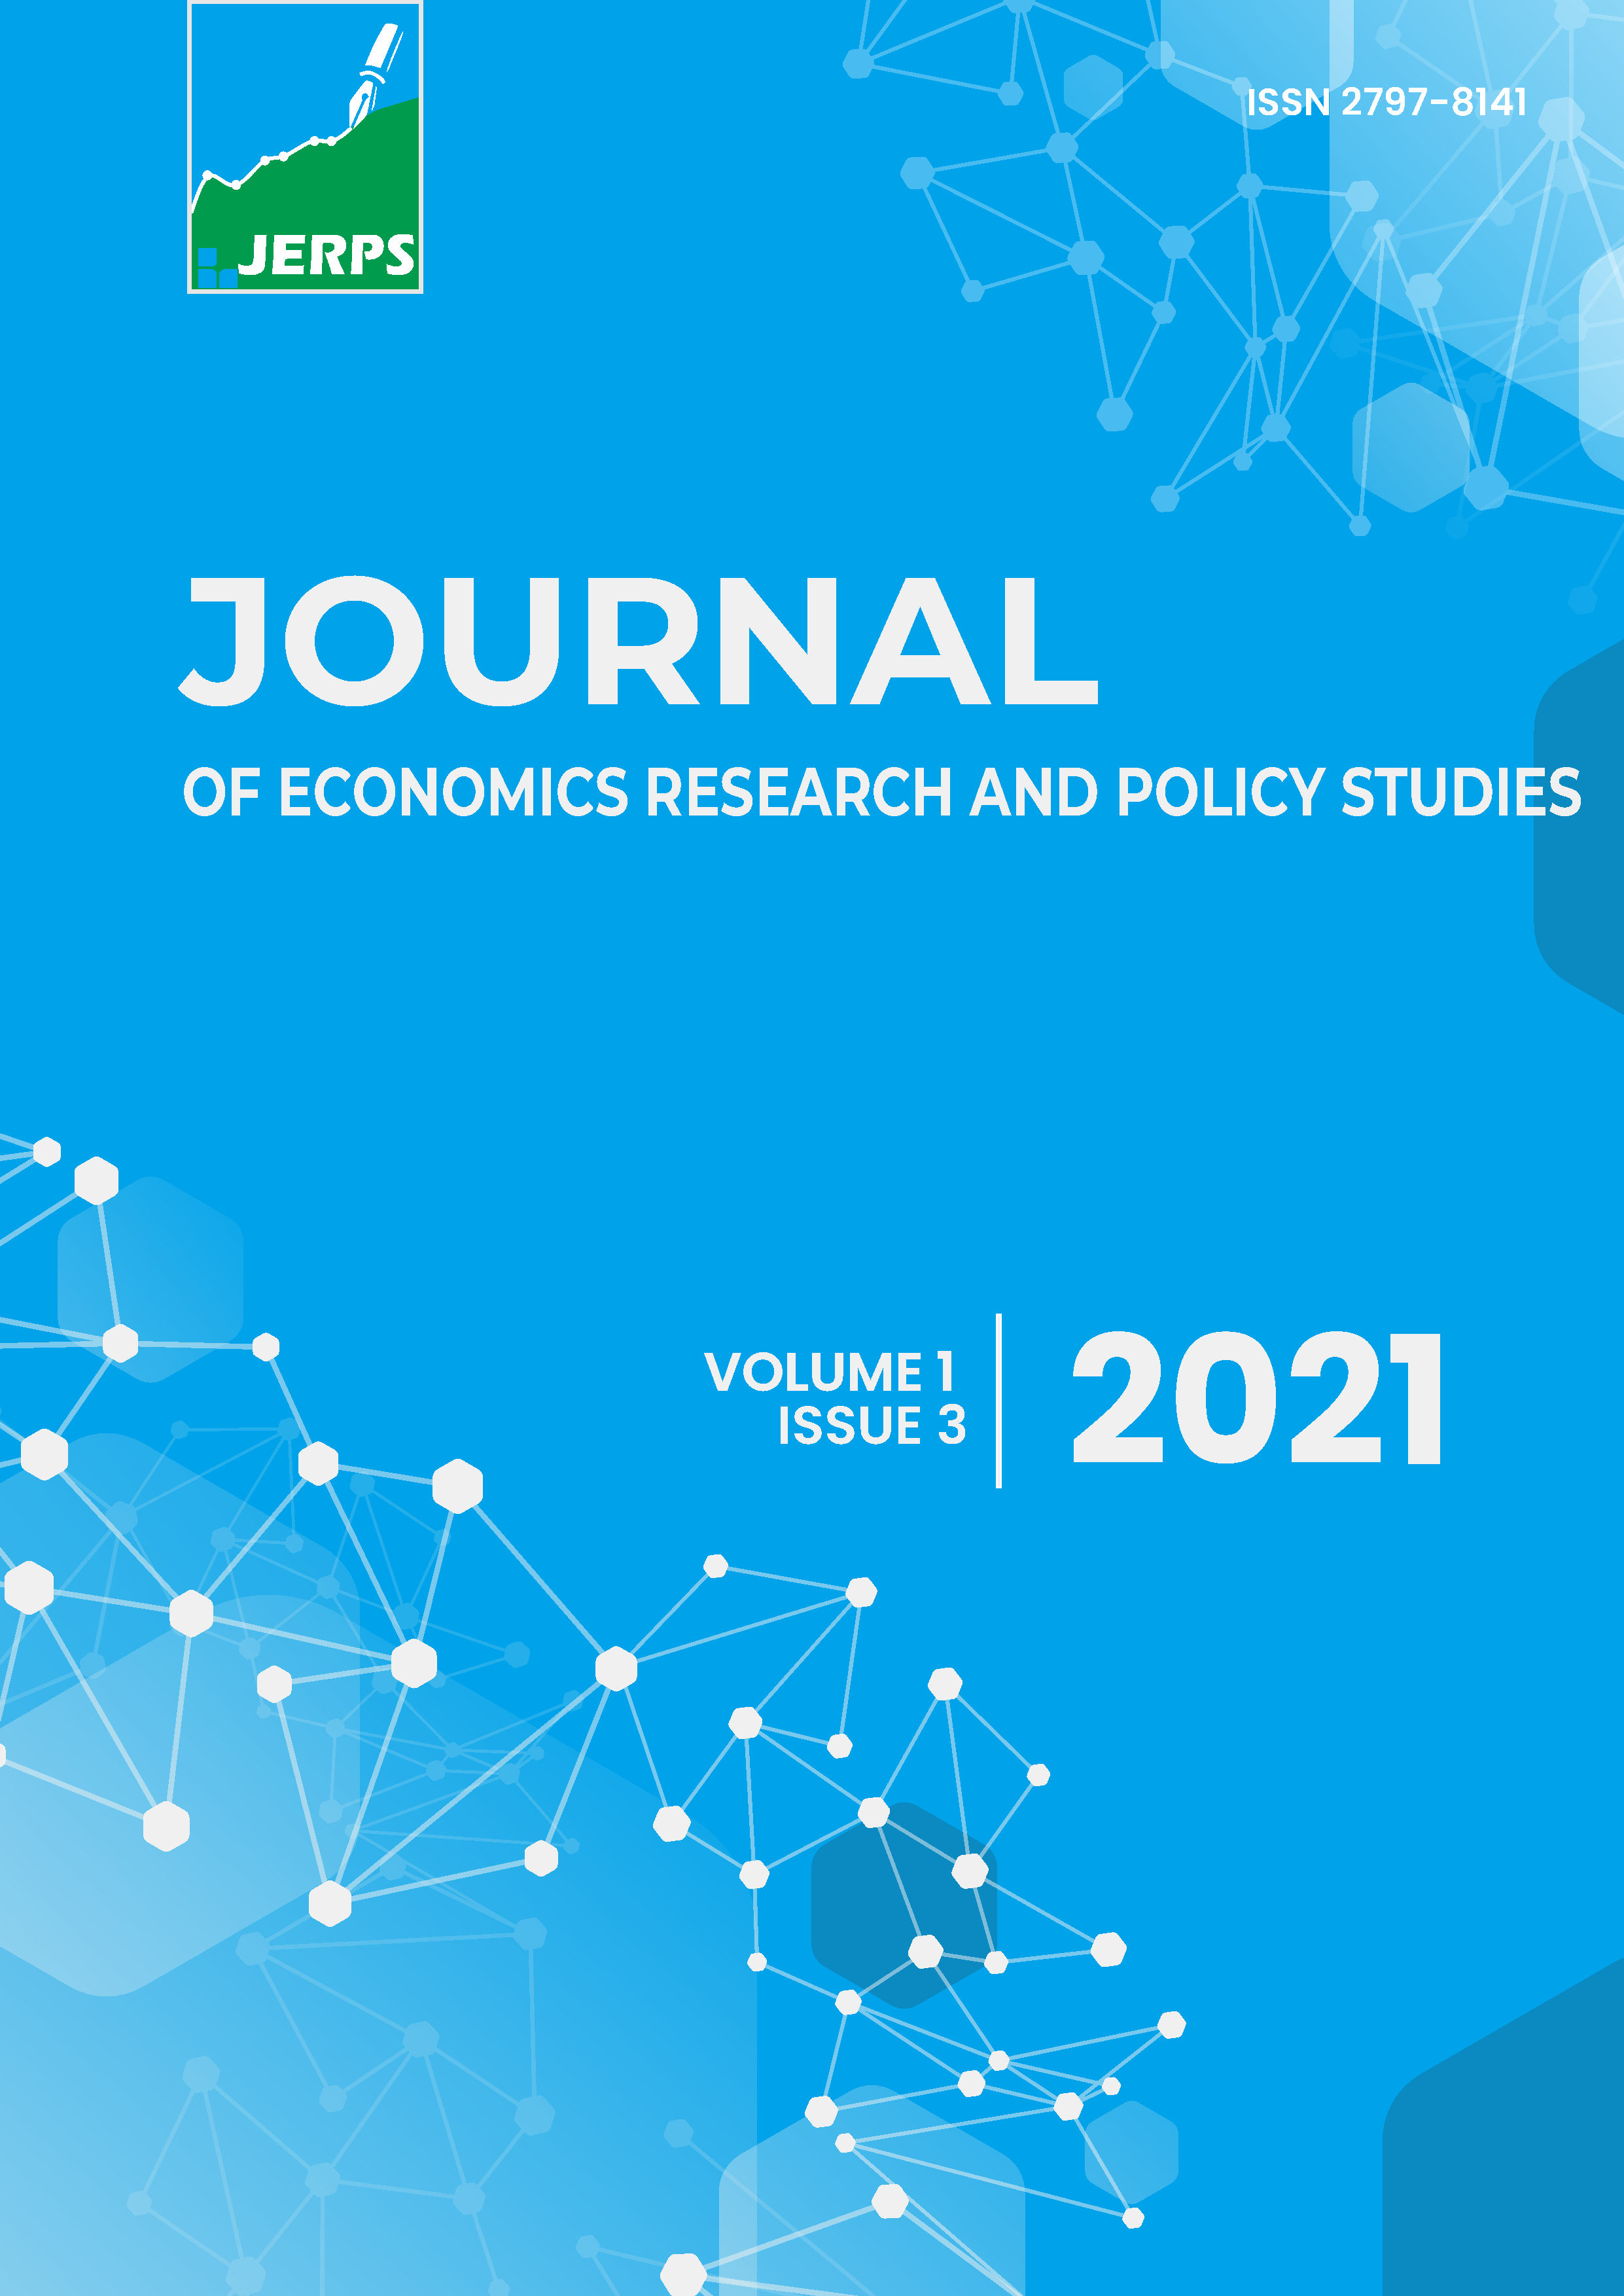 					View Vol. 1 No. 3 (2021): Journal of Economics Research and Policy Studies
				